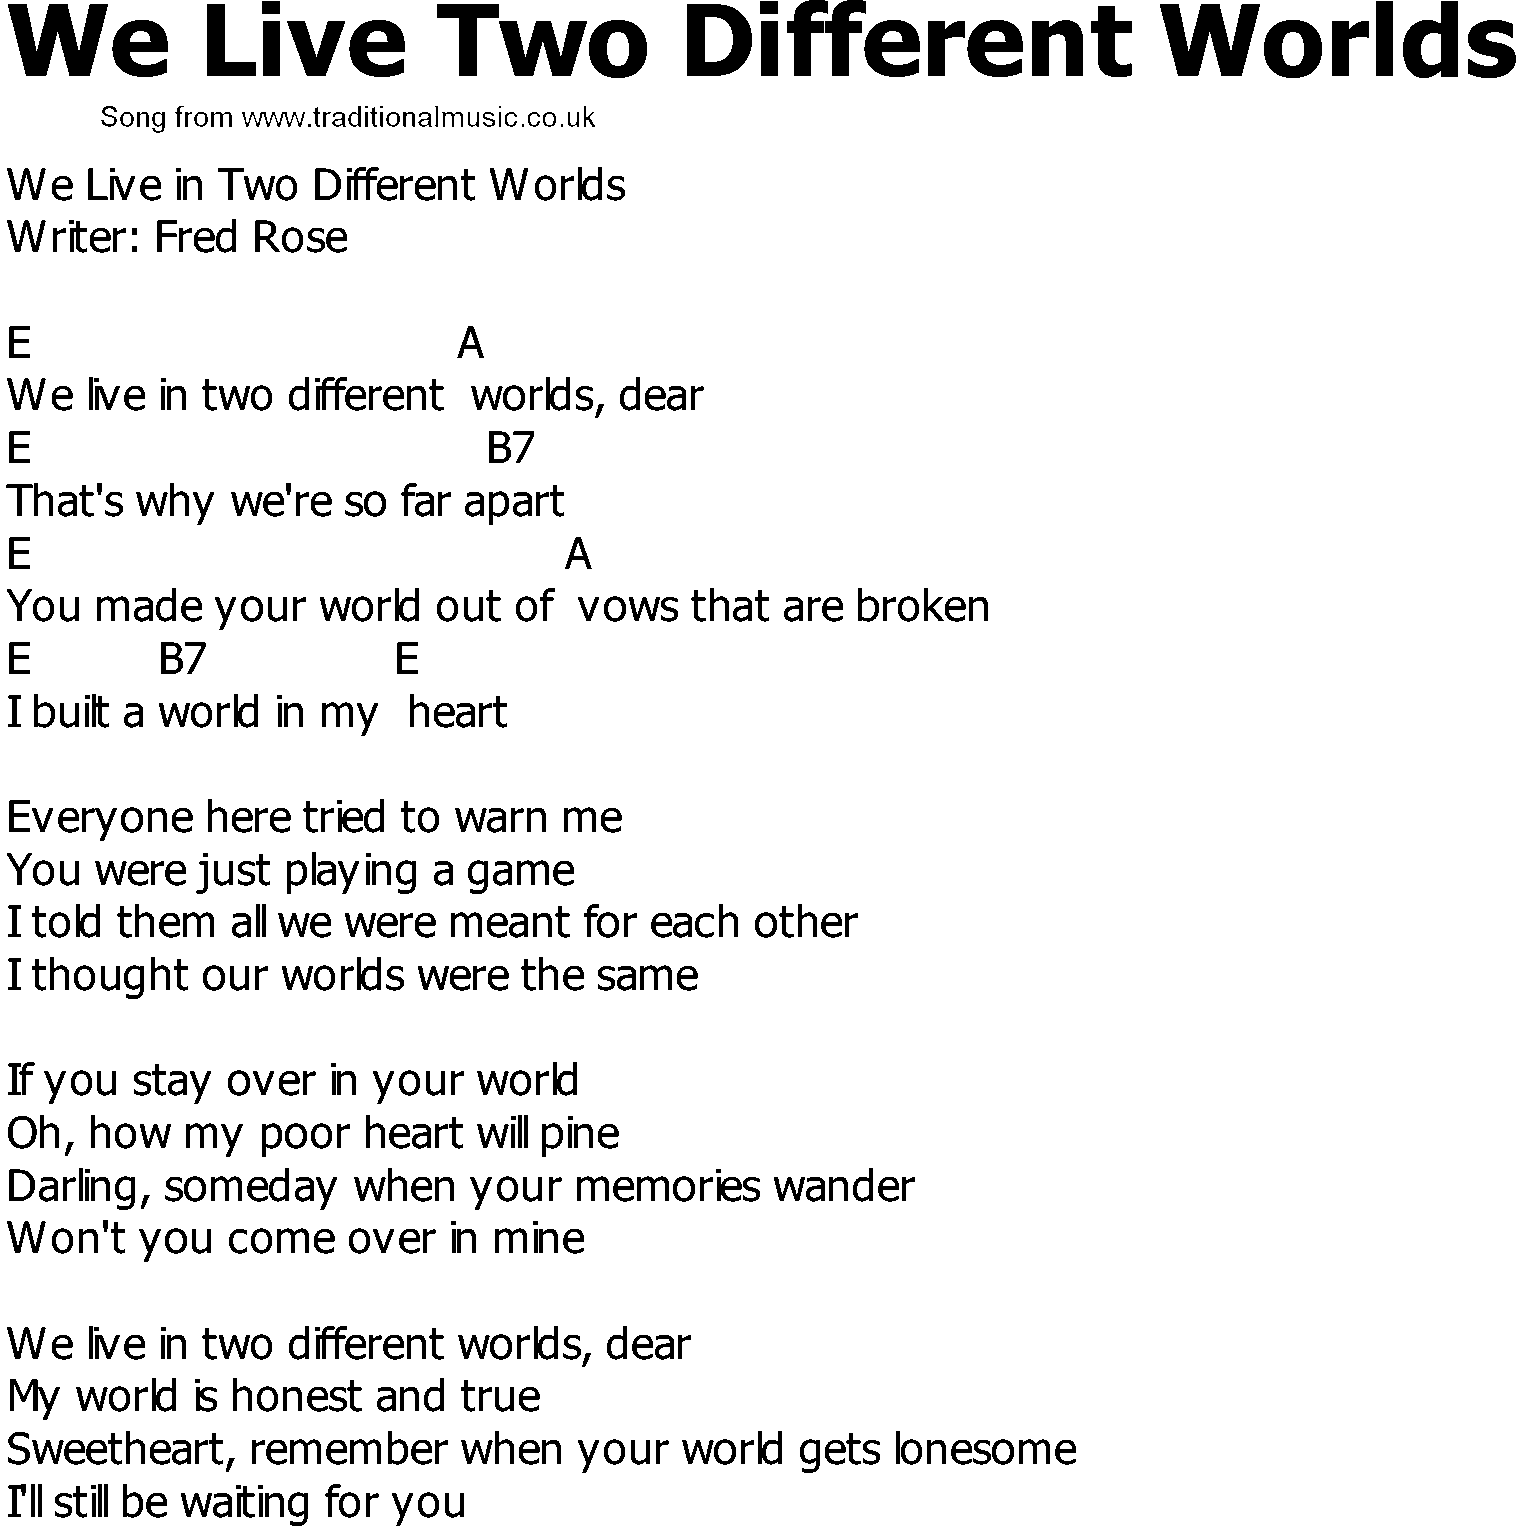 Old Country song lyrics with chords - We Live Two Different Worlds